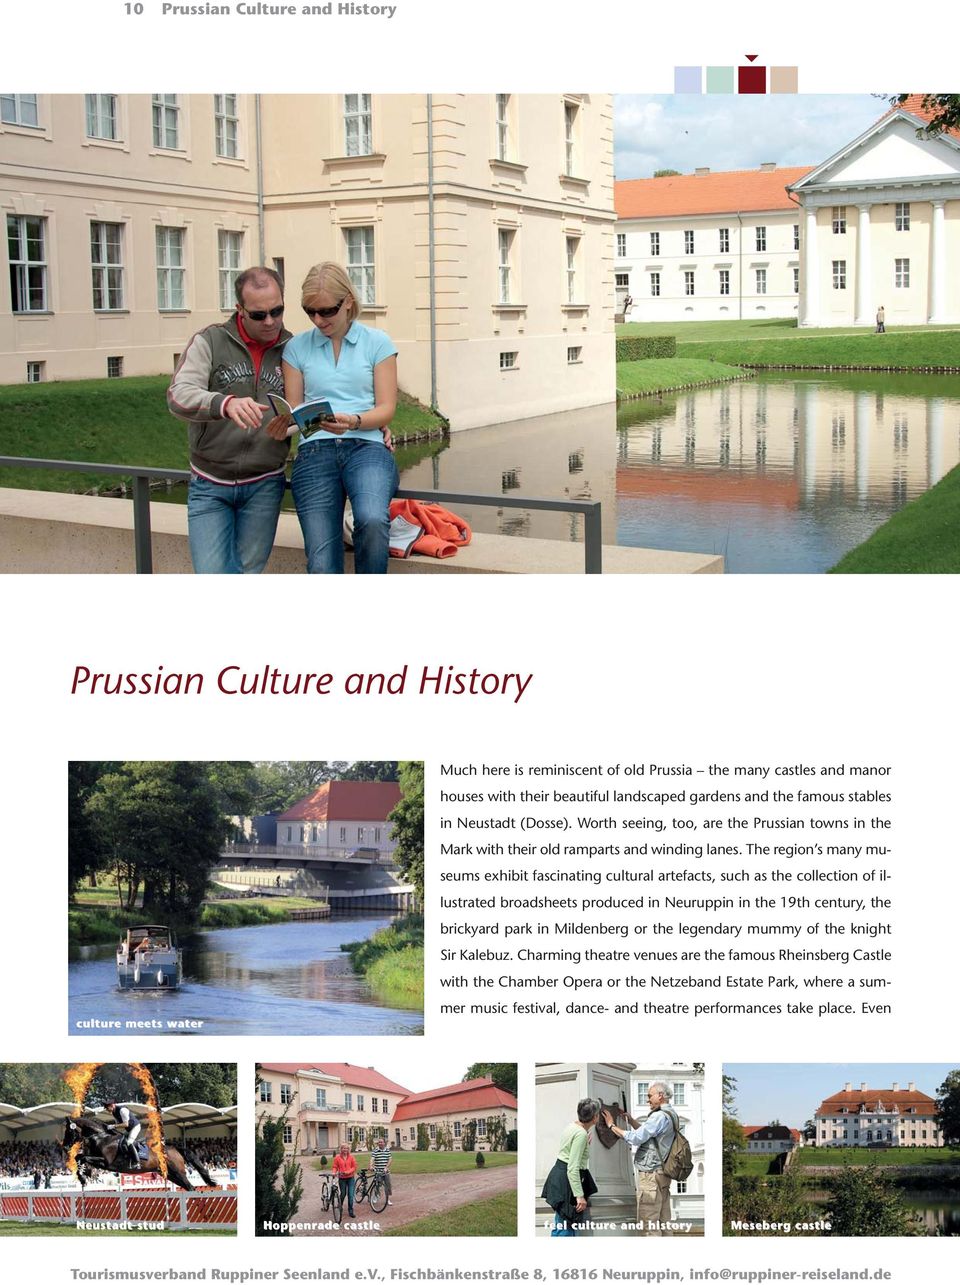 The region s many museums exhibit fascinating cultural artefacts, such as the collection of illustrated broadsheets produced in Neuruppin in the 19th century, the brickyard park in Mildenberg or the